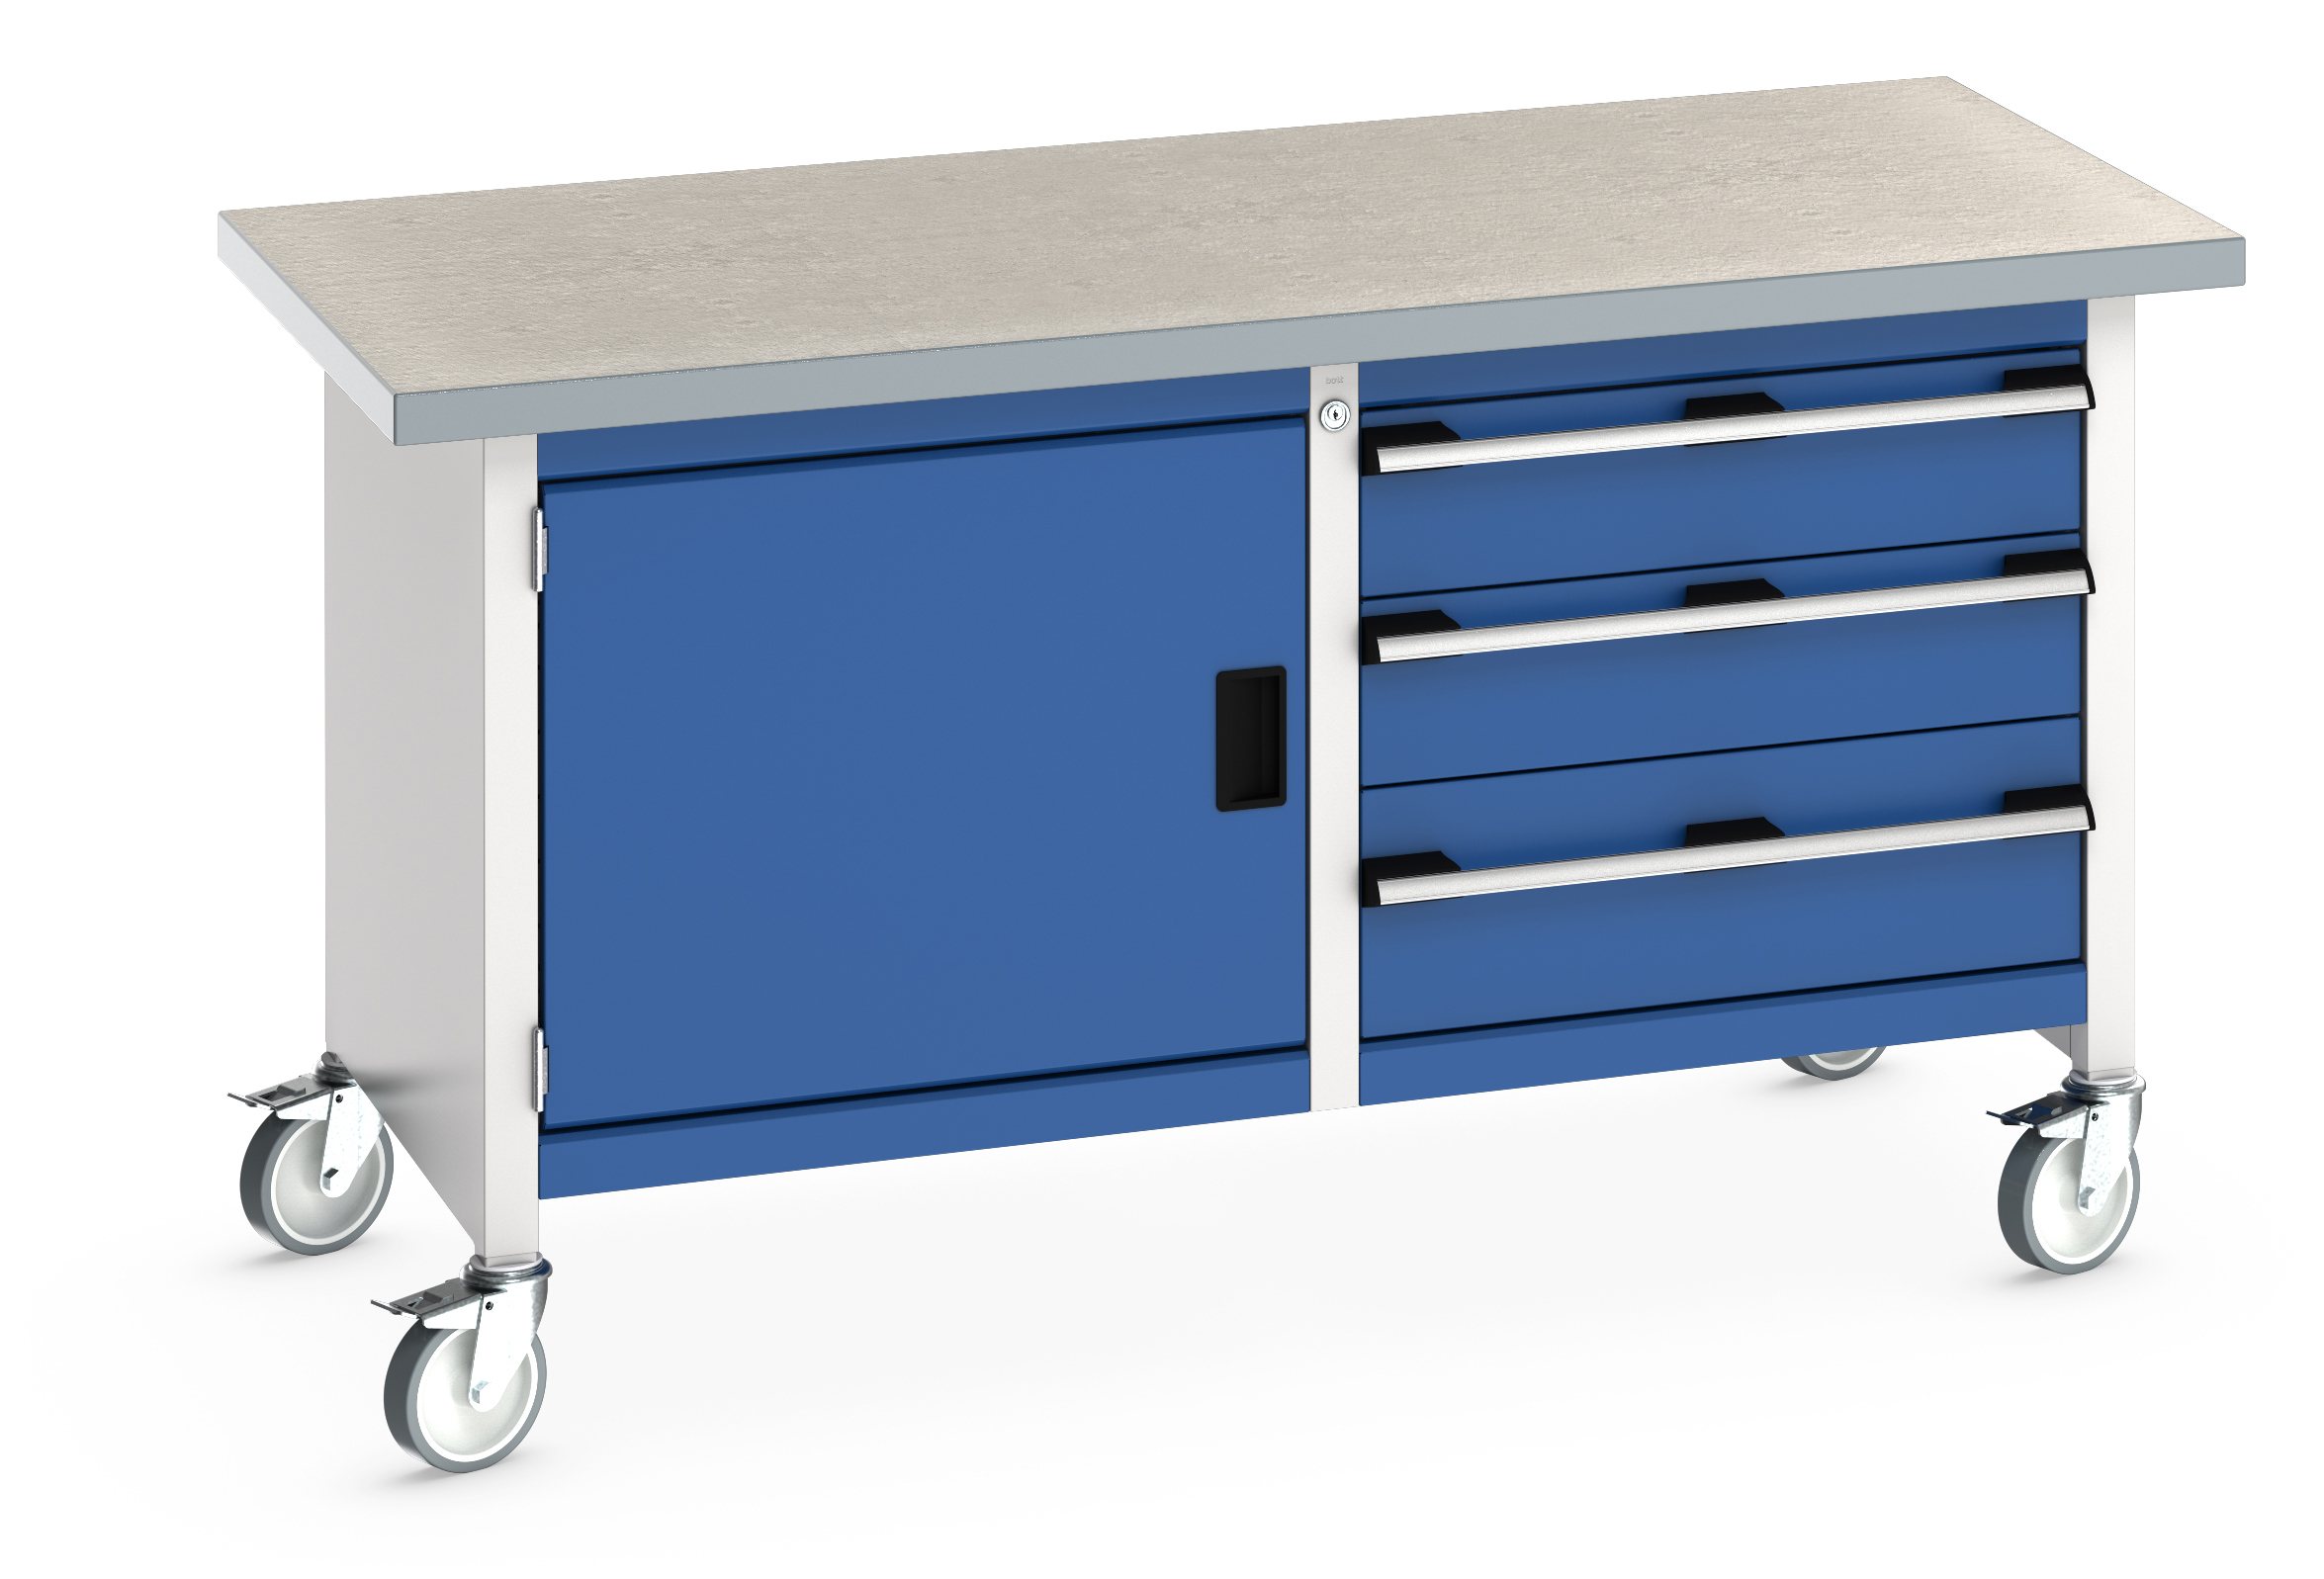 Bott Cubio Mobile Storage Bench With Full Cupboard / 3 Drawer Cabinet - 41002102.11V